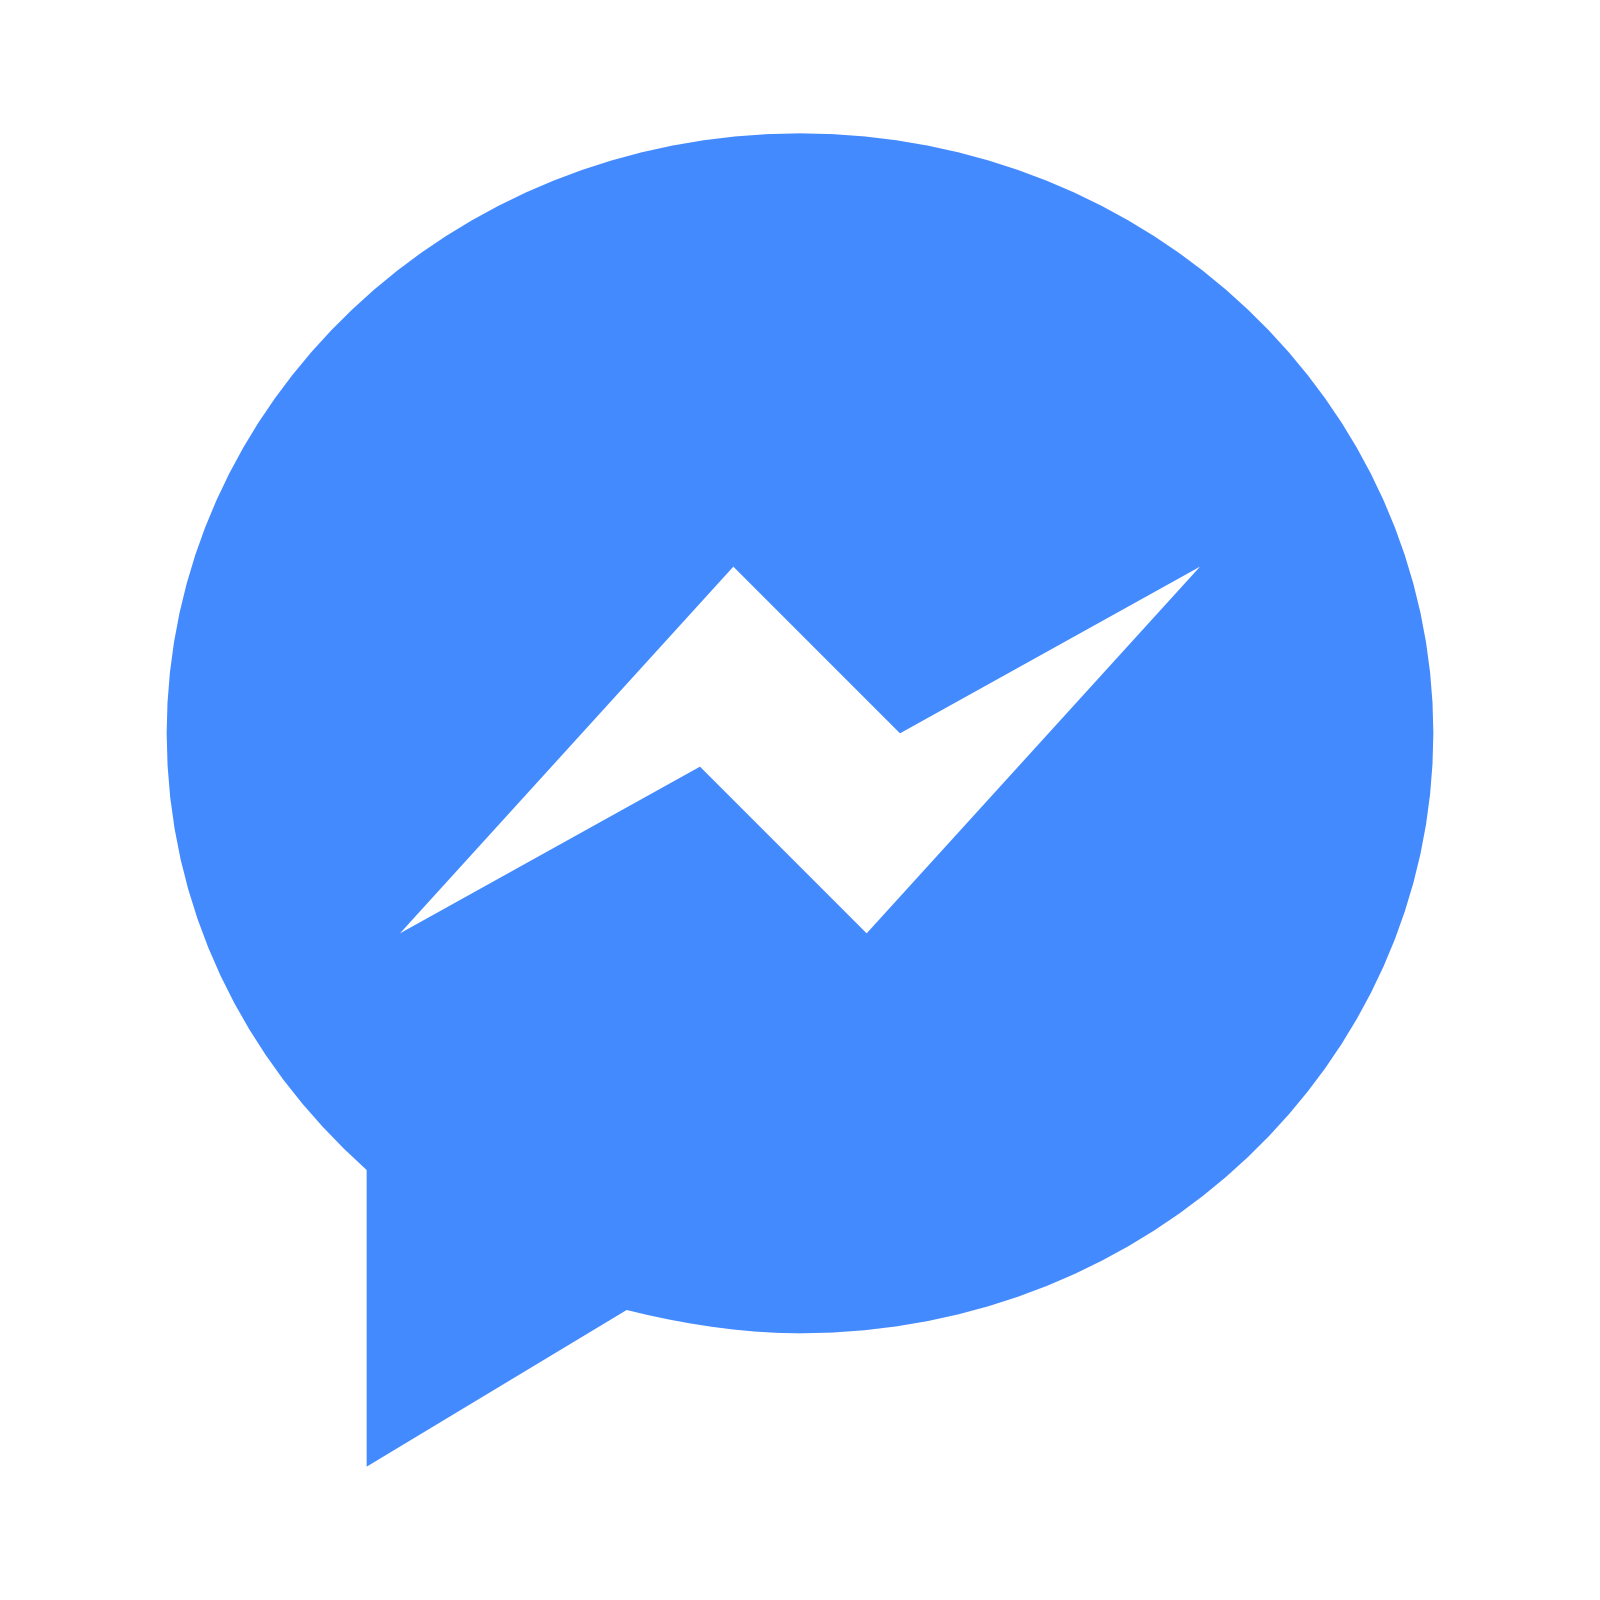 Facebook Messenger for PC Windows XP/7/8/8.1/10 Free Download